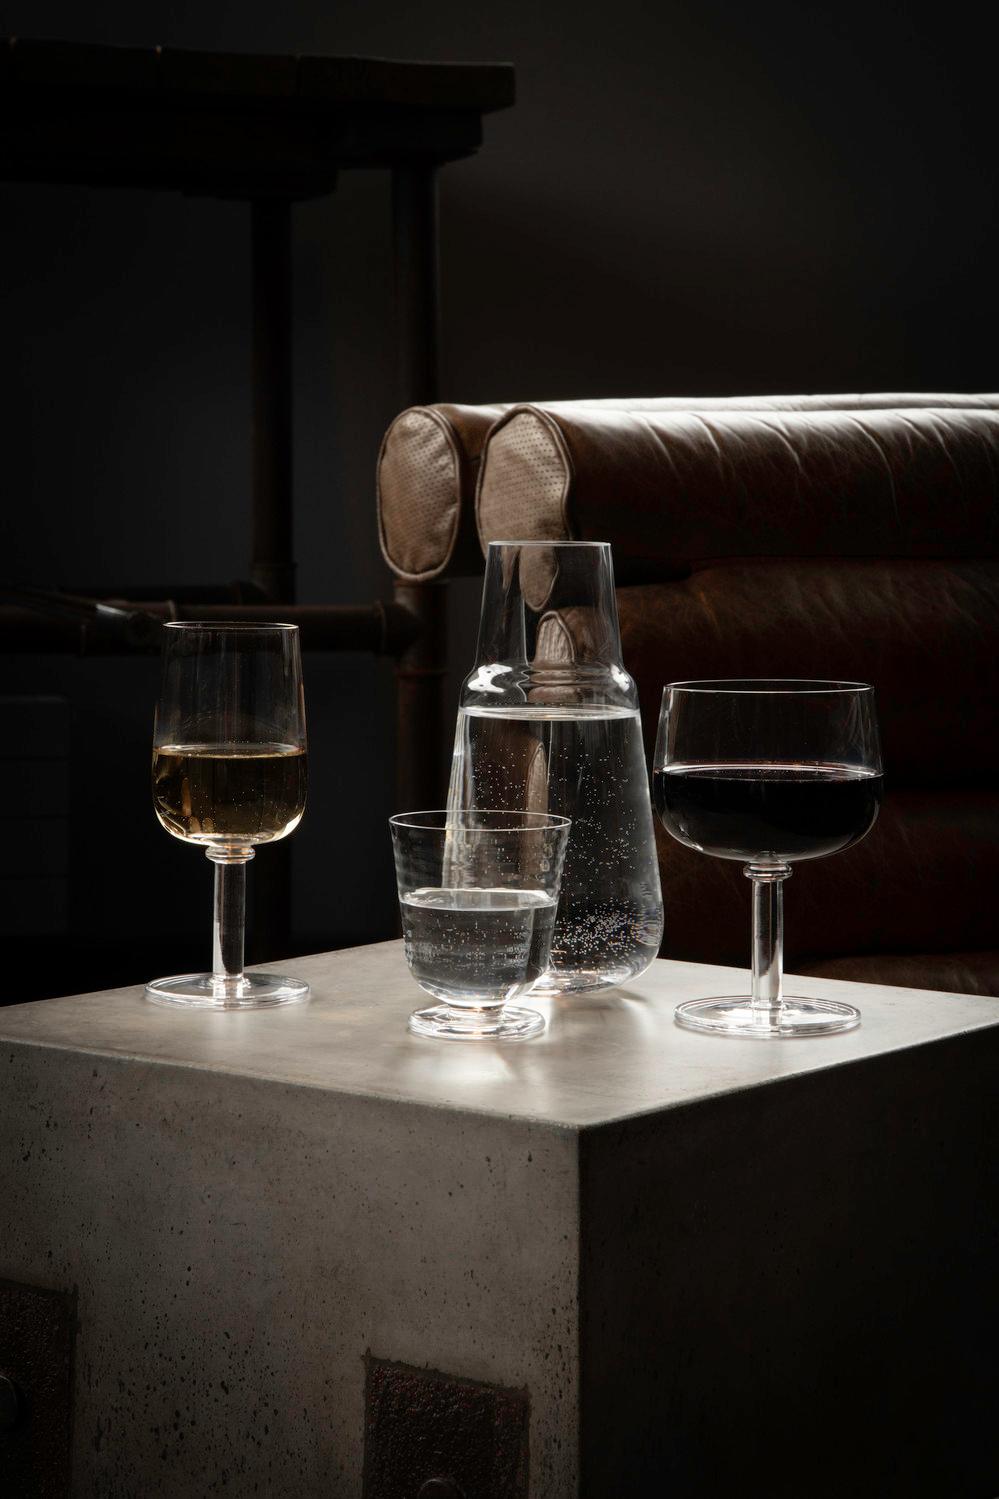 The small glass in the Viva collection from Kosta Boda is – in our opinion – a water glass, but naturally, you can use it for whatever you like. Maybe juice? Multitasking at its best. Design by Matti Klenell.
